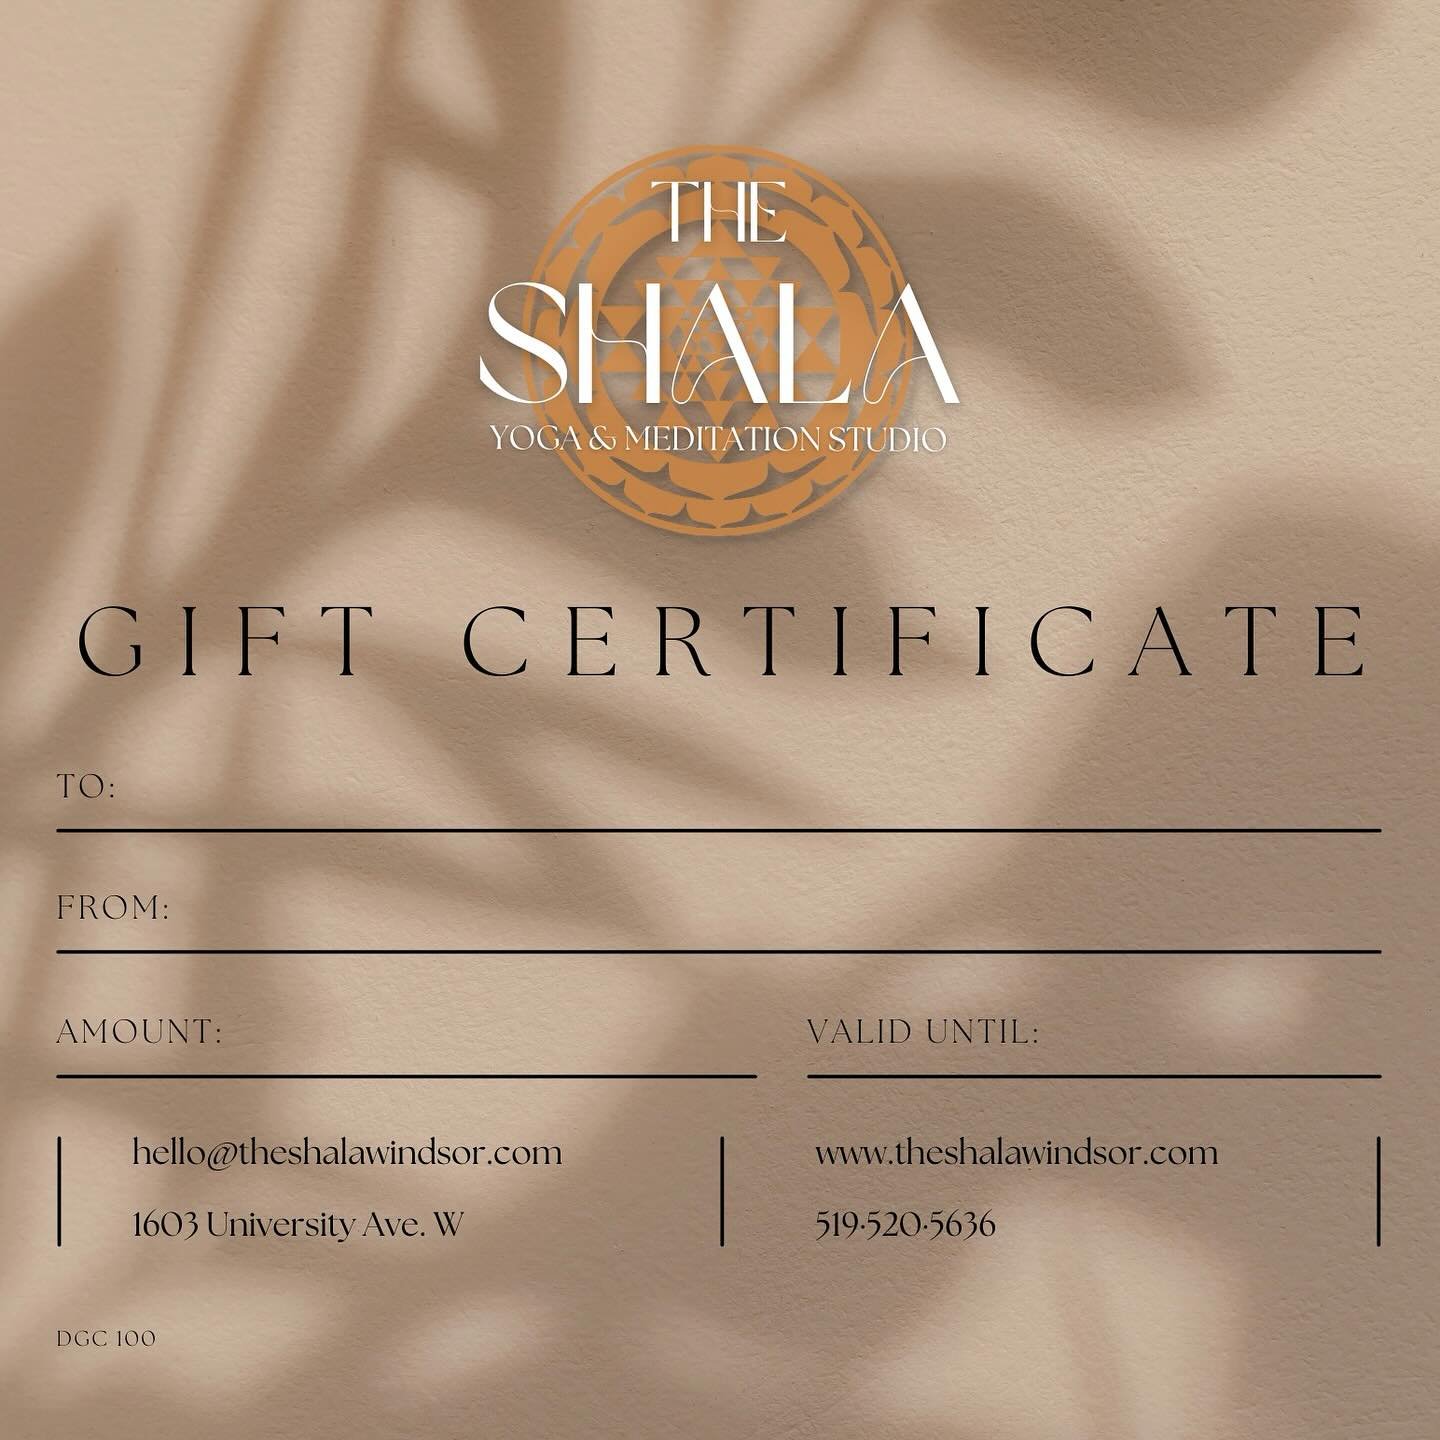 GIFT CERTIFICATES 🏷️

We&rsquo;ve got Gift Certificates ready for you to give yoga, meditation, and breathwork practices taught by educated and experienced teachers to the people you love. 

We&rsquo;re able to provide you with physical certificates